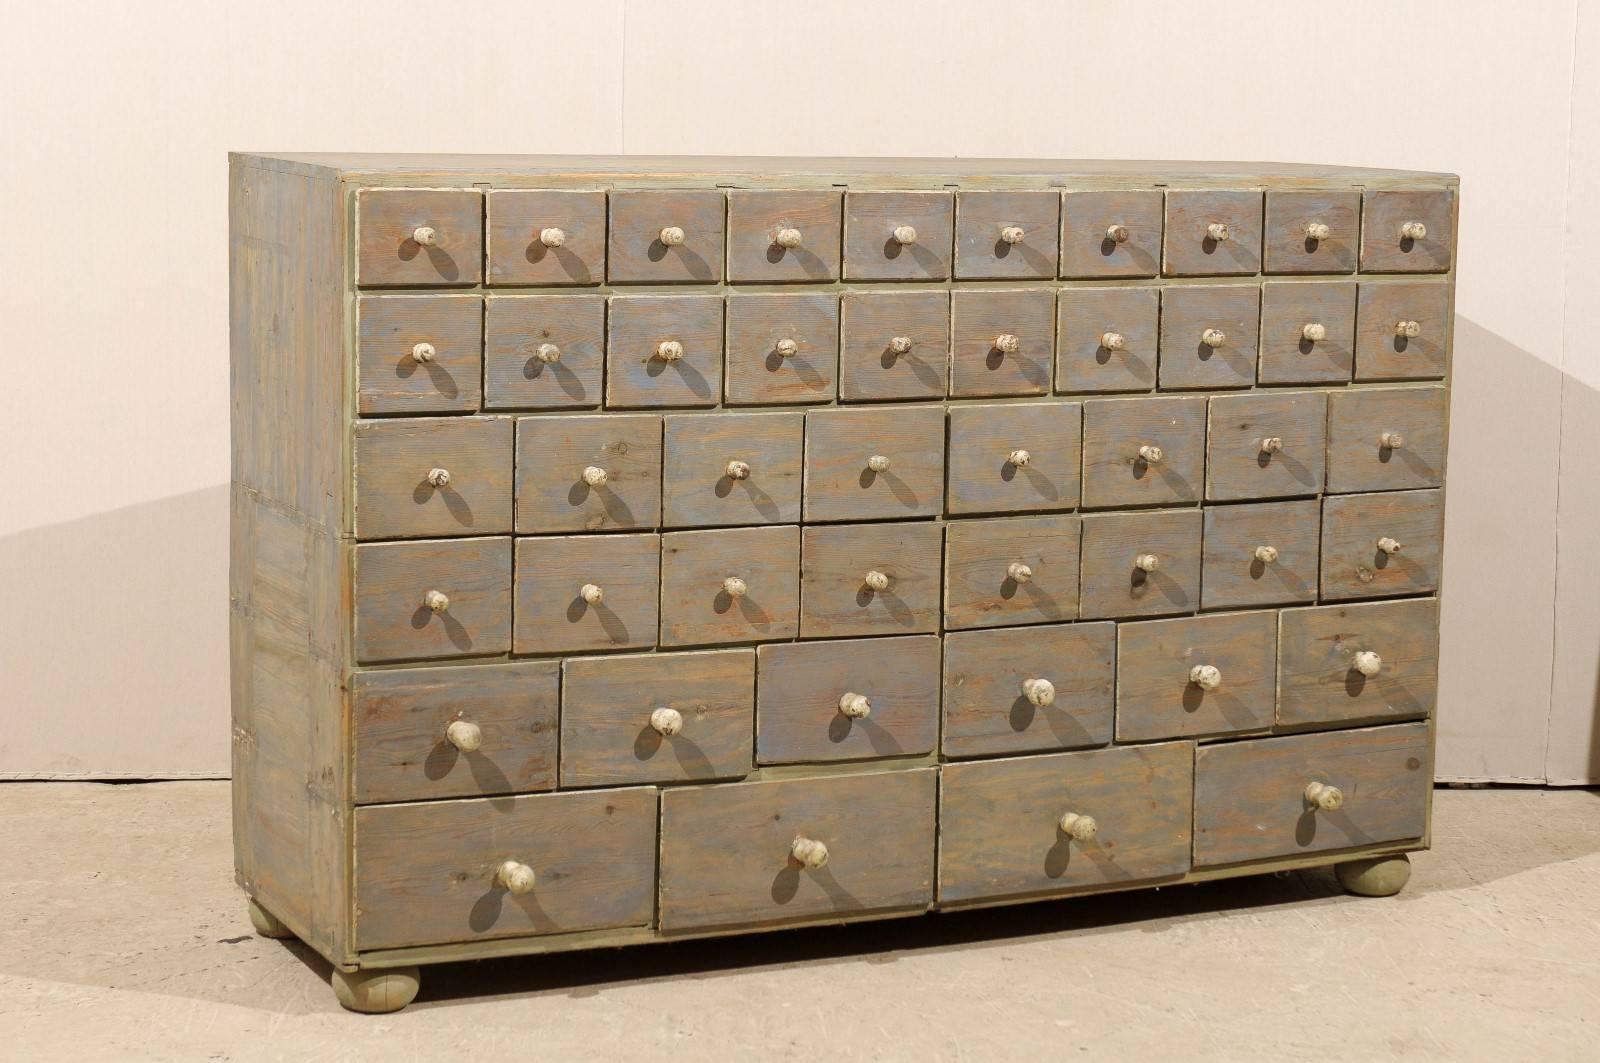 A Swedish 19th century apothecary painted wood chest with multiple drawers, raised on bun feet. This Swedish chest has a multitude of drawers of varying sizes for optimal storage. The drawers go from small to larger from top to bottom. It has been